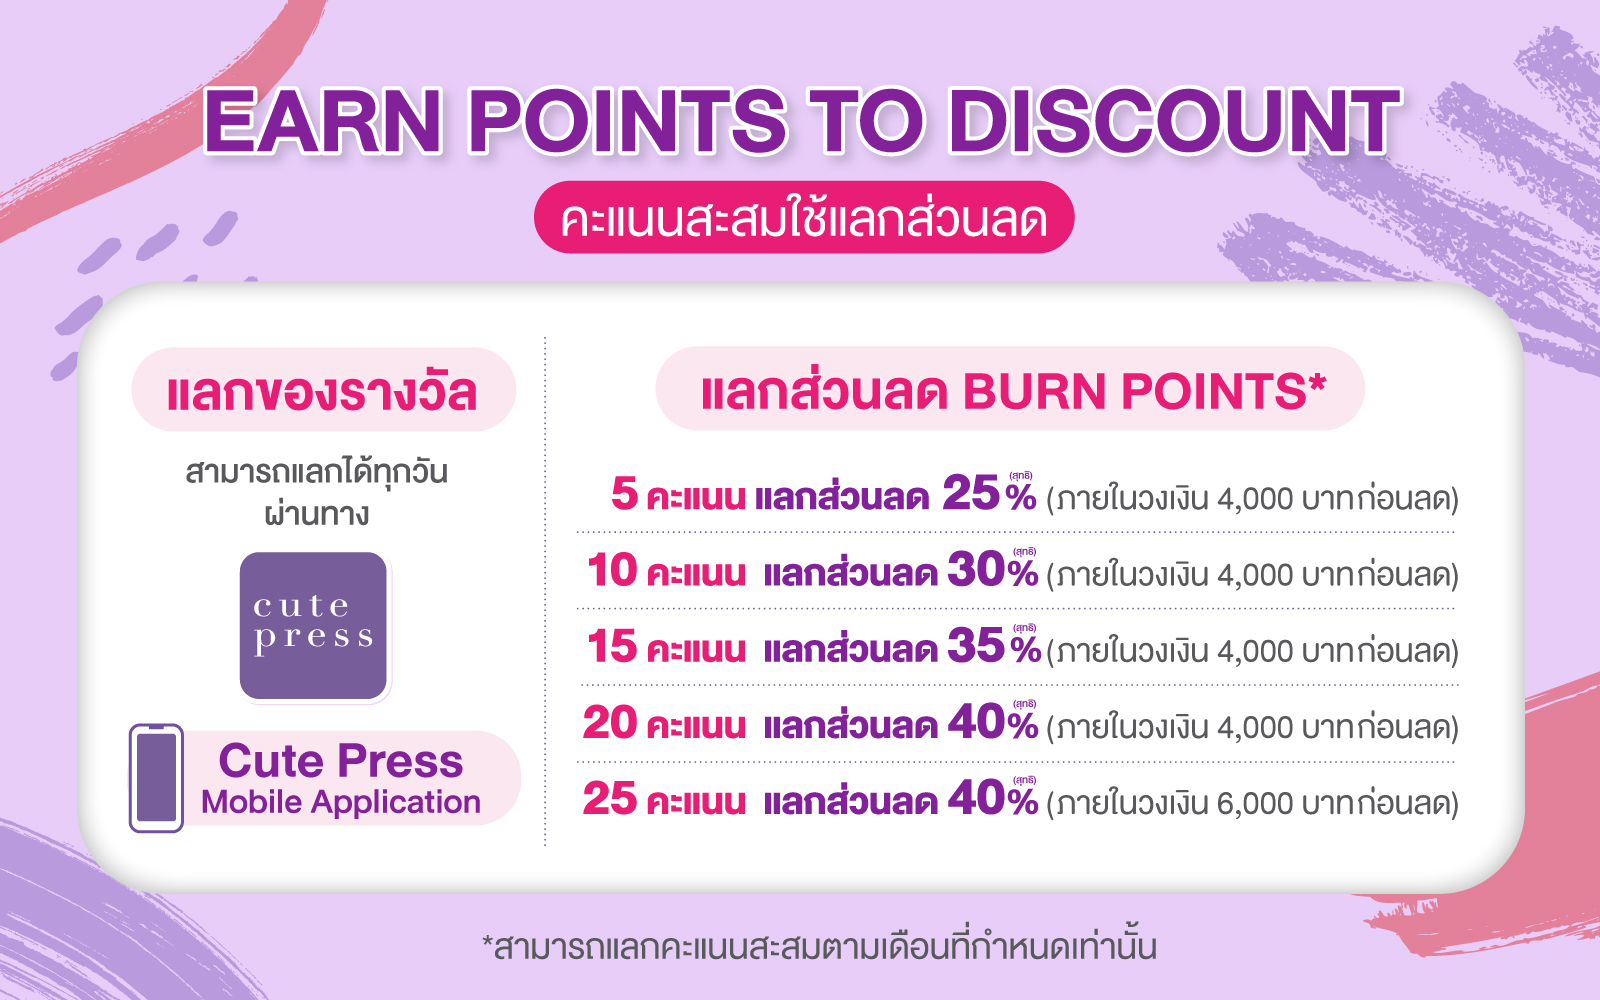 Earn Points to Discount